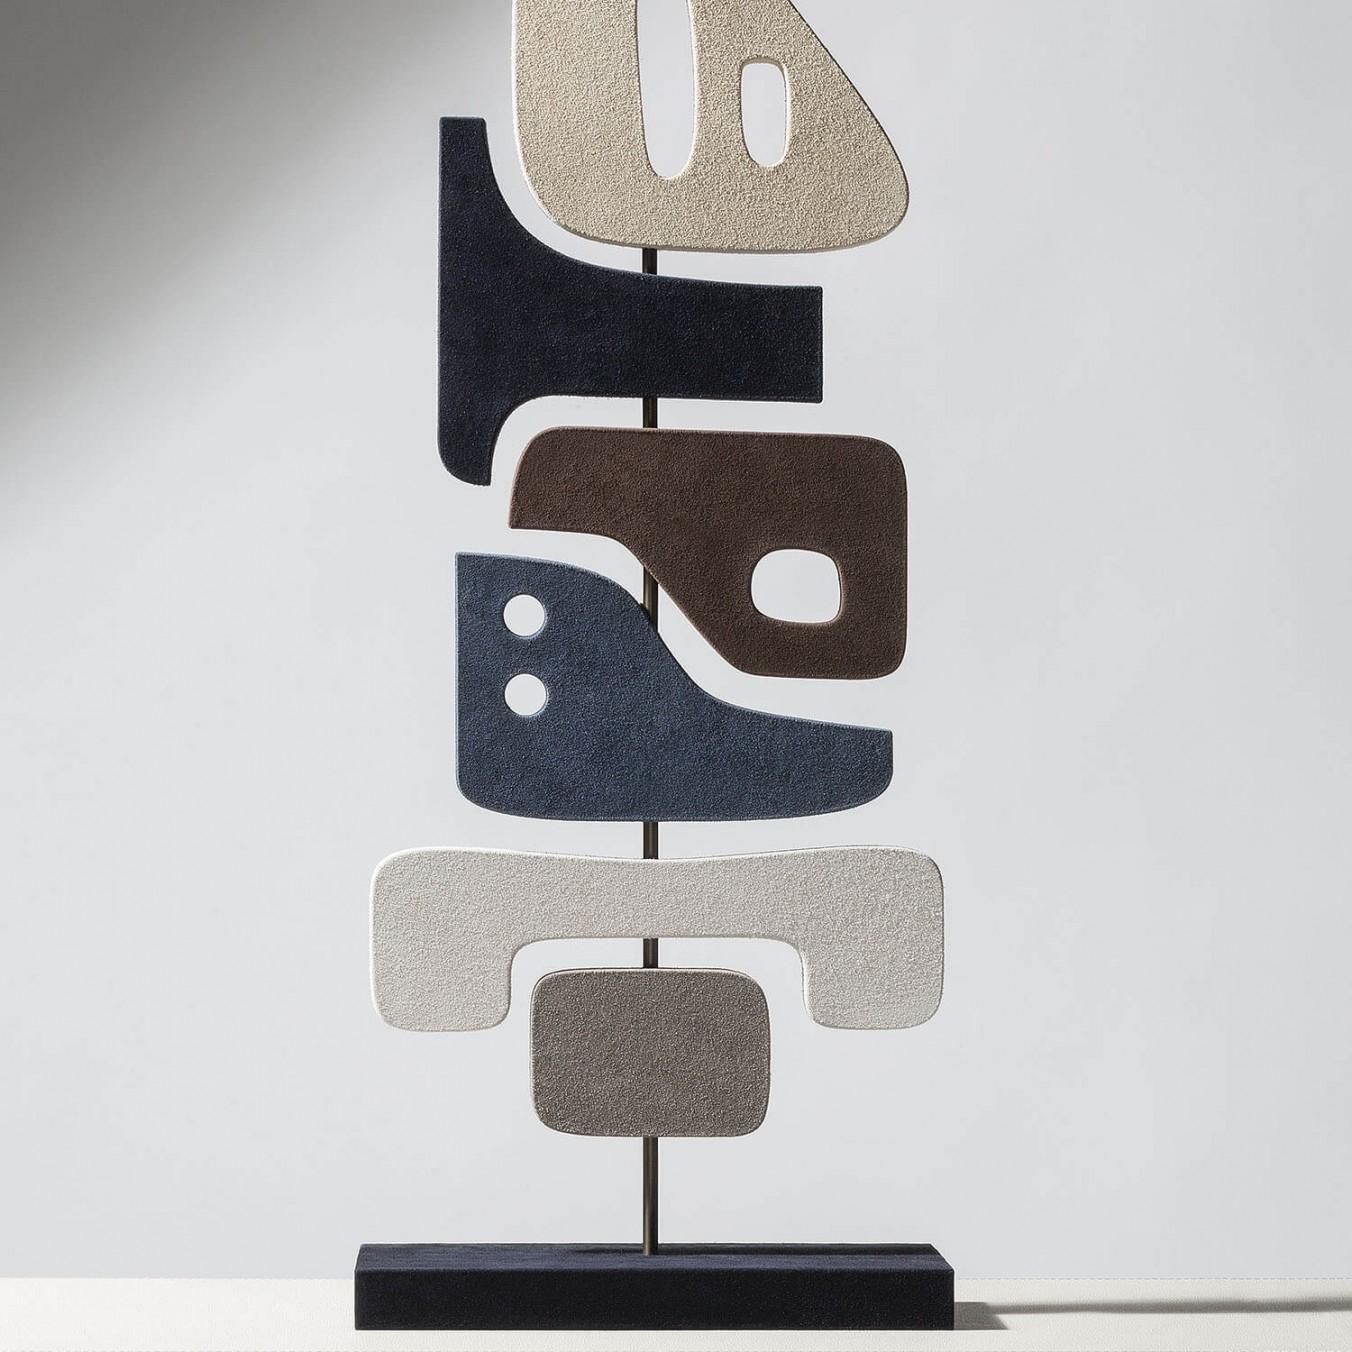 Contemporary leather sculpture - Tabou 3 by Stephane Parmentier for Giobagnara.

A mix of space-age design and tribal art, these contemporary totems are great decorative pieces able to create a connection between abstraction and